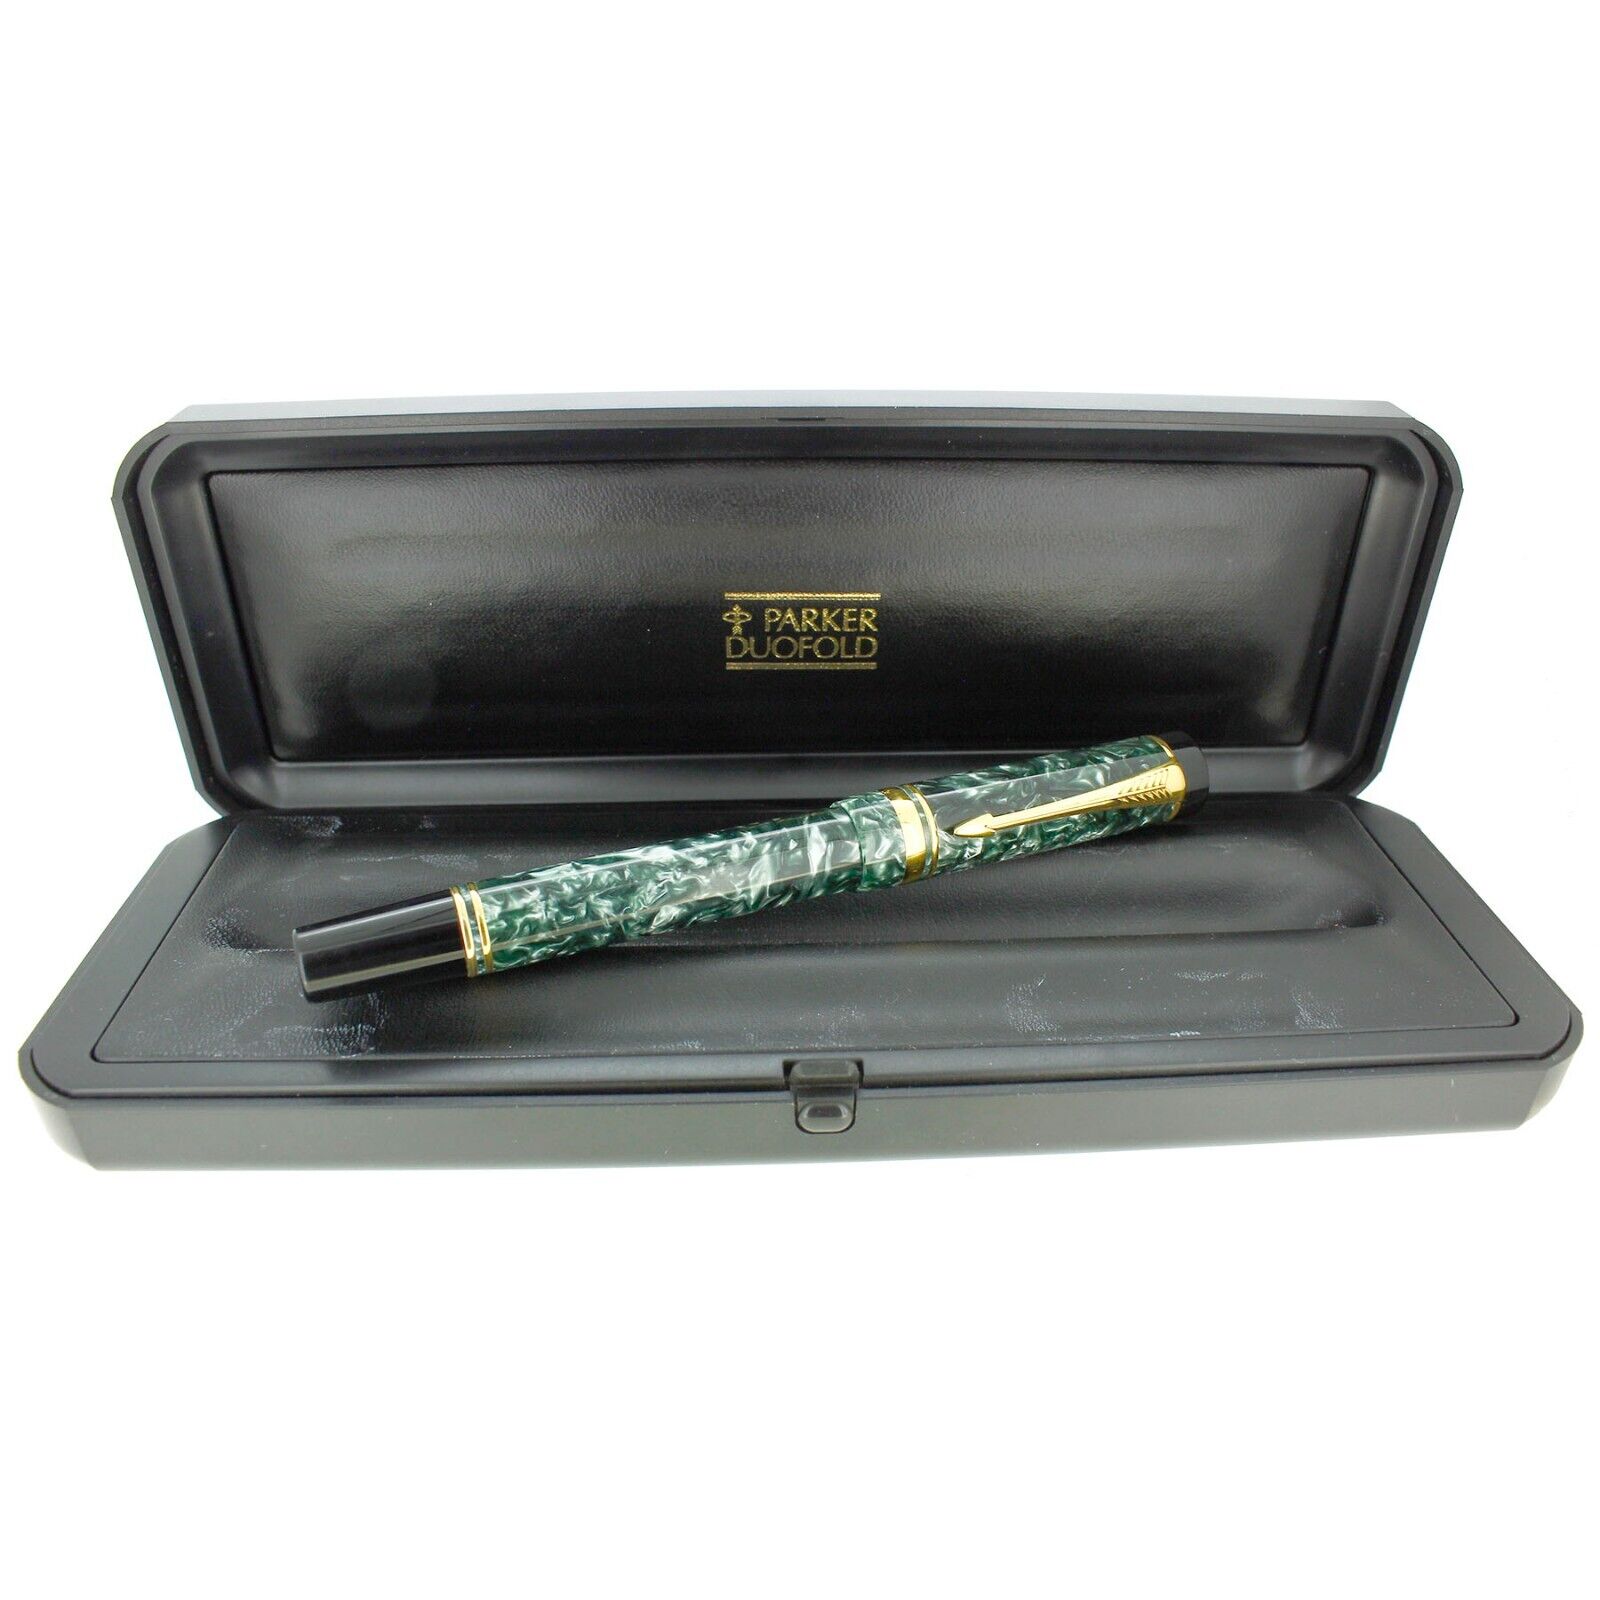 1992 PARKER DUOFOLD GREEN MARBLE ROLLERBALL PEN IN BOX MADE IN UK